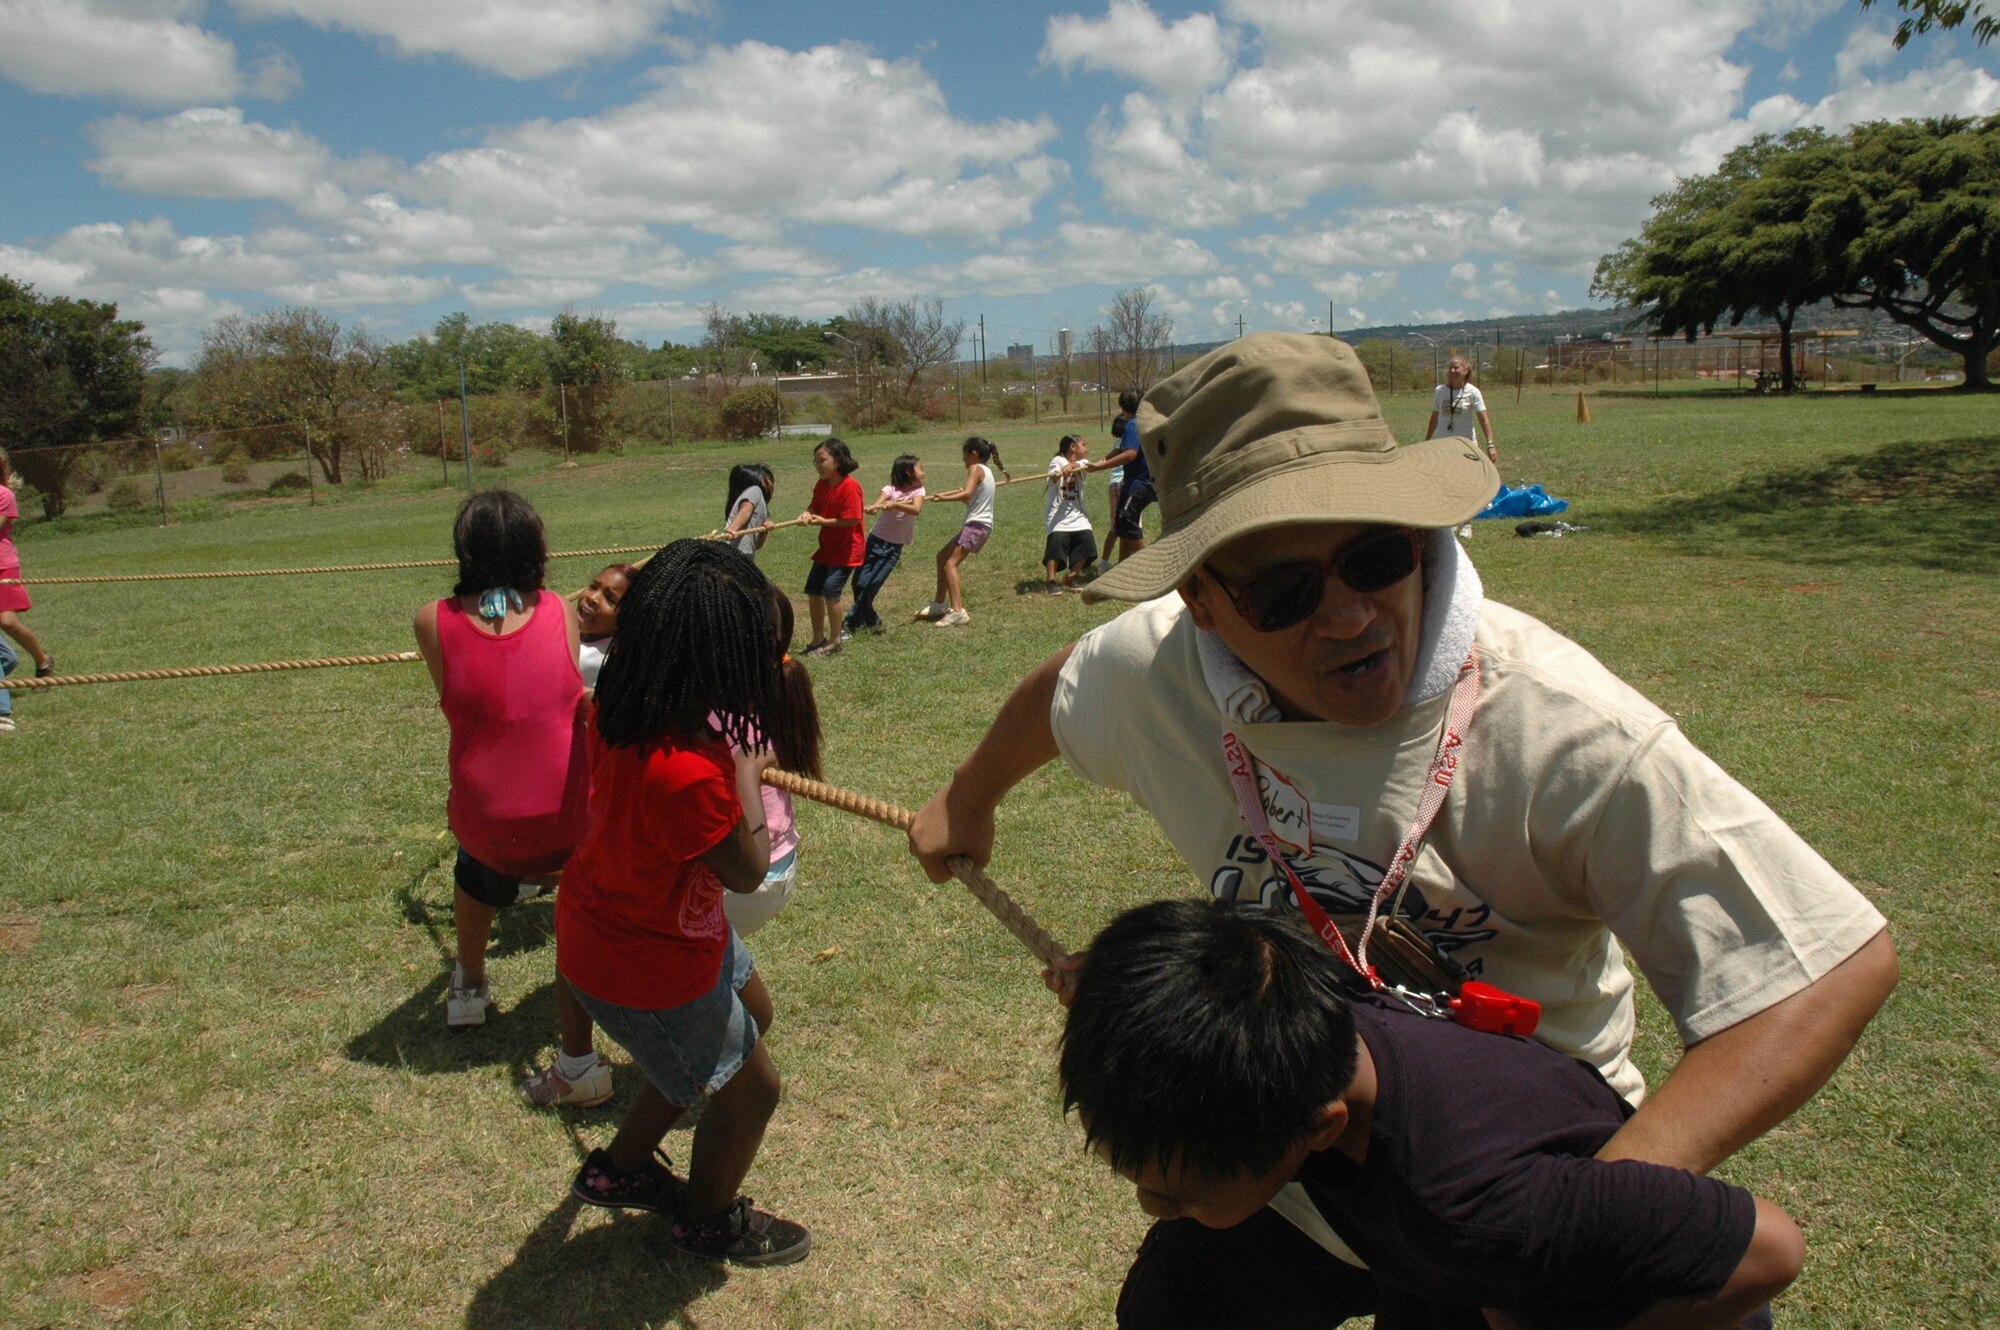 Master Sgt. Robert Tancayo, 624th Civil Engineer Squadron, tries to give his team the edge in a four-way tug-of-war match at Makalapa Elementary School's Field Day, May 28-29. 624th CES is a part of the 624th Regional Support Group, Hickam Air Force Base, Hawaii. The 624th RSG has been involved with Makalapa since 2004 as part of the Hickam School Partnership program. (U.S. Air Force photo/Master Sgt. Daniel Nathaniel)